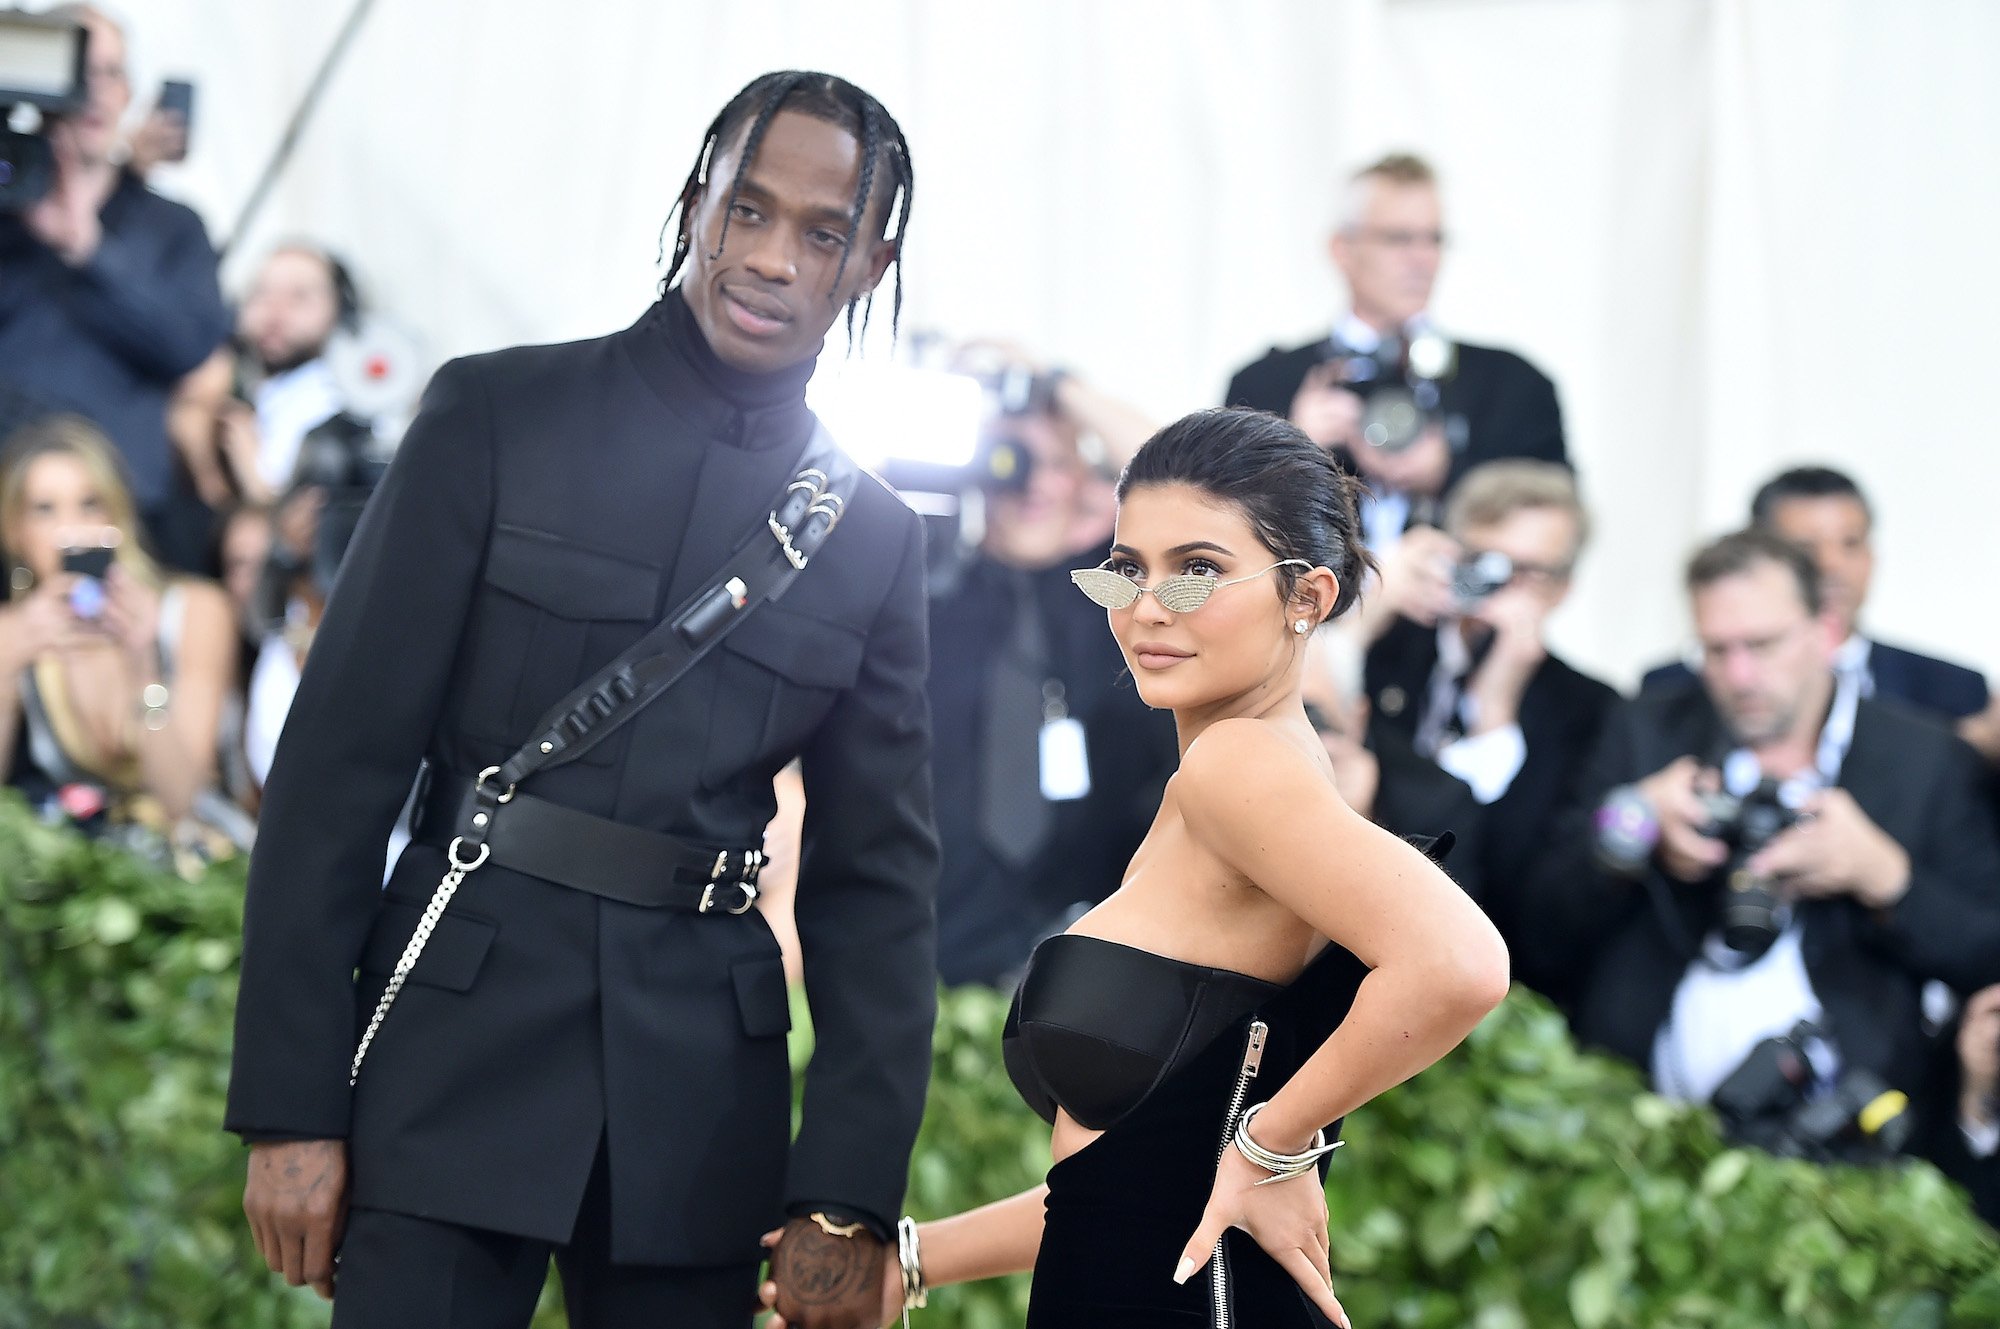 Travis Scott and Kylie Jenner arrive at the 2018 Met Gala